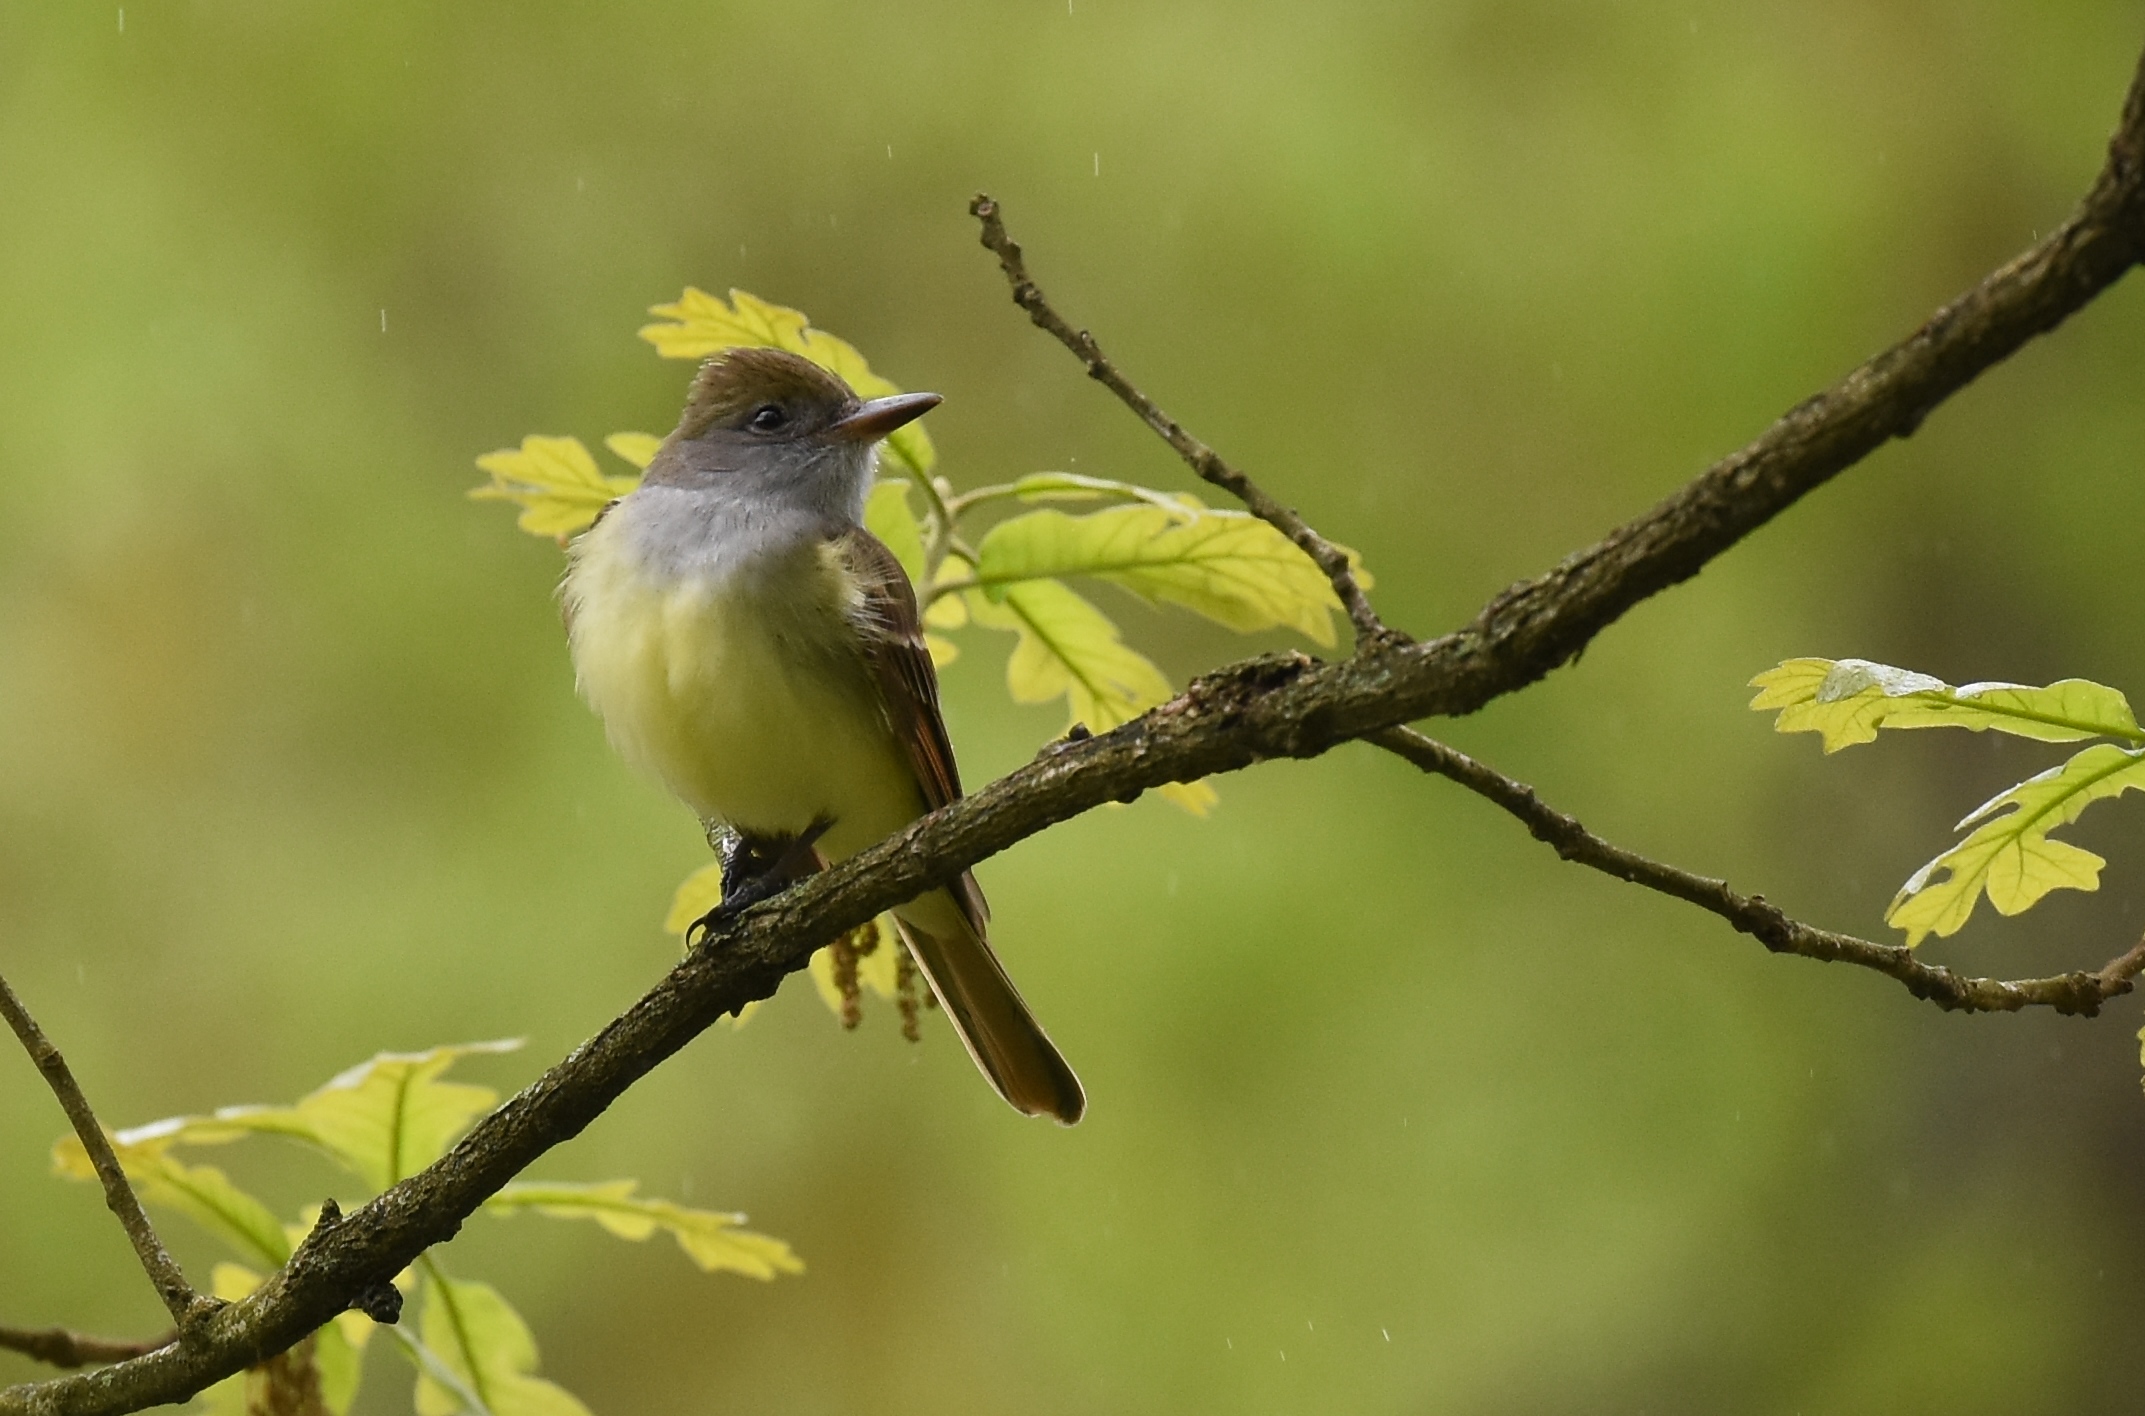 The Great-crested Flycatcher, a cavity-nesting species, has been recorded breeding in the Raoul Wallenberg Forest Preserve. Photo: Andy Reago & Chrissy McClarren/CC BY 2.0